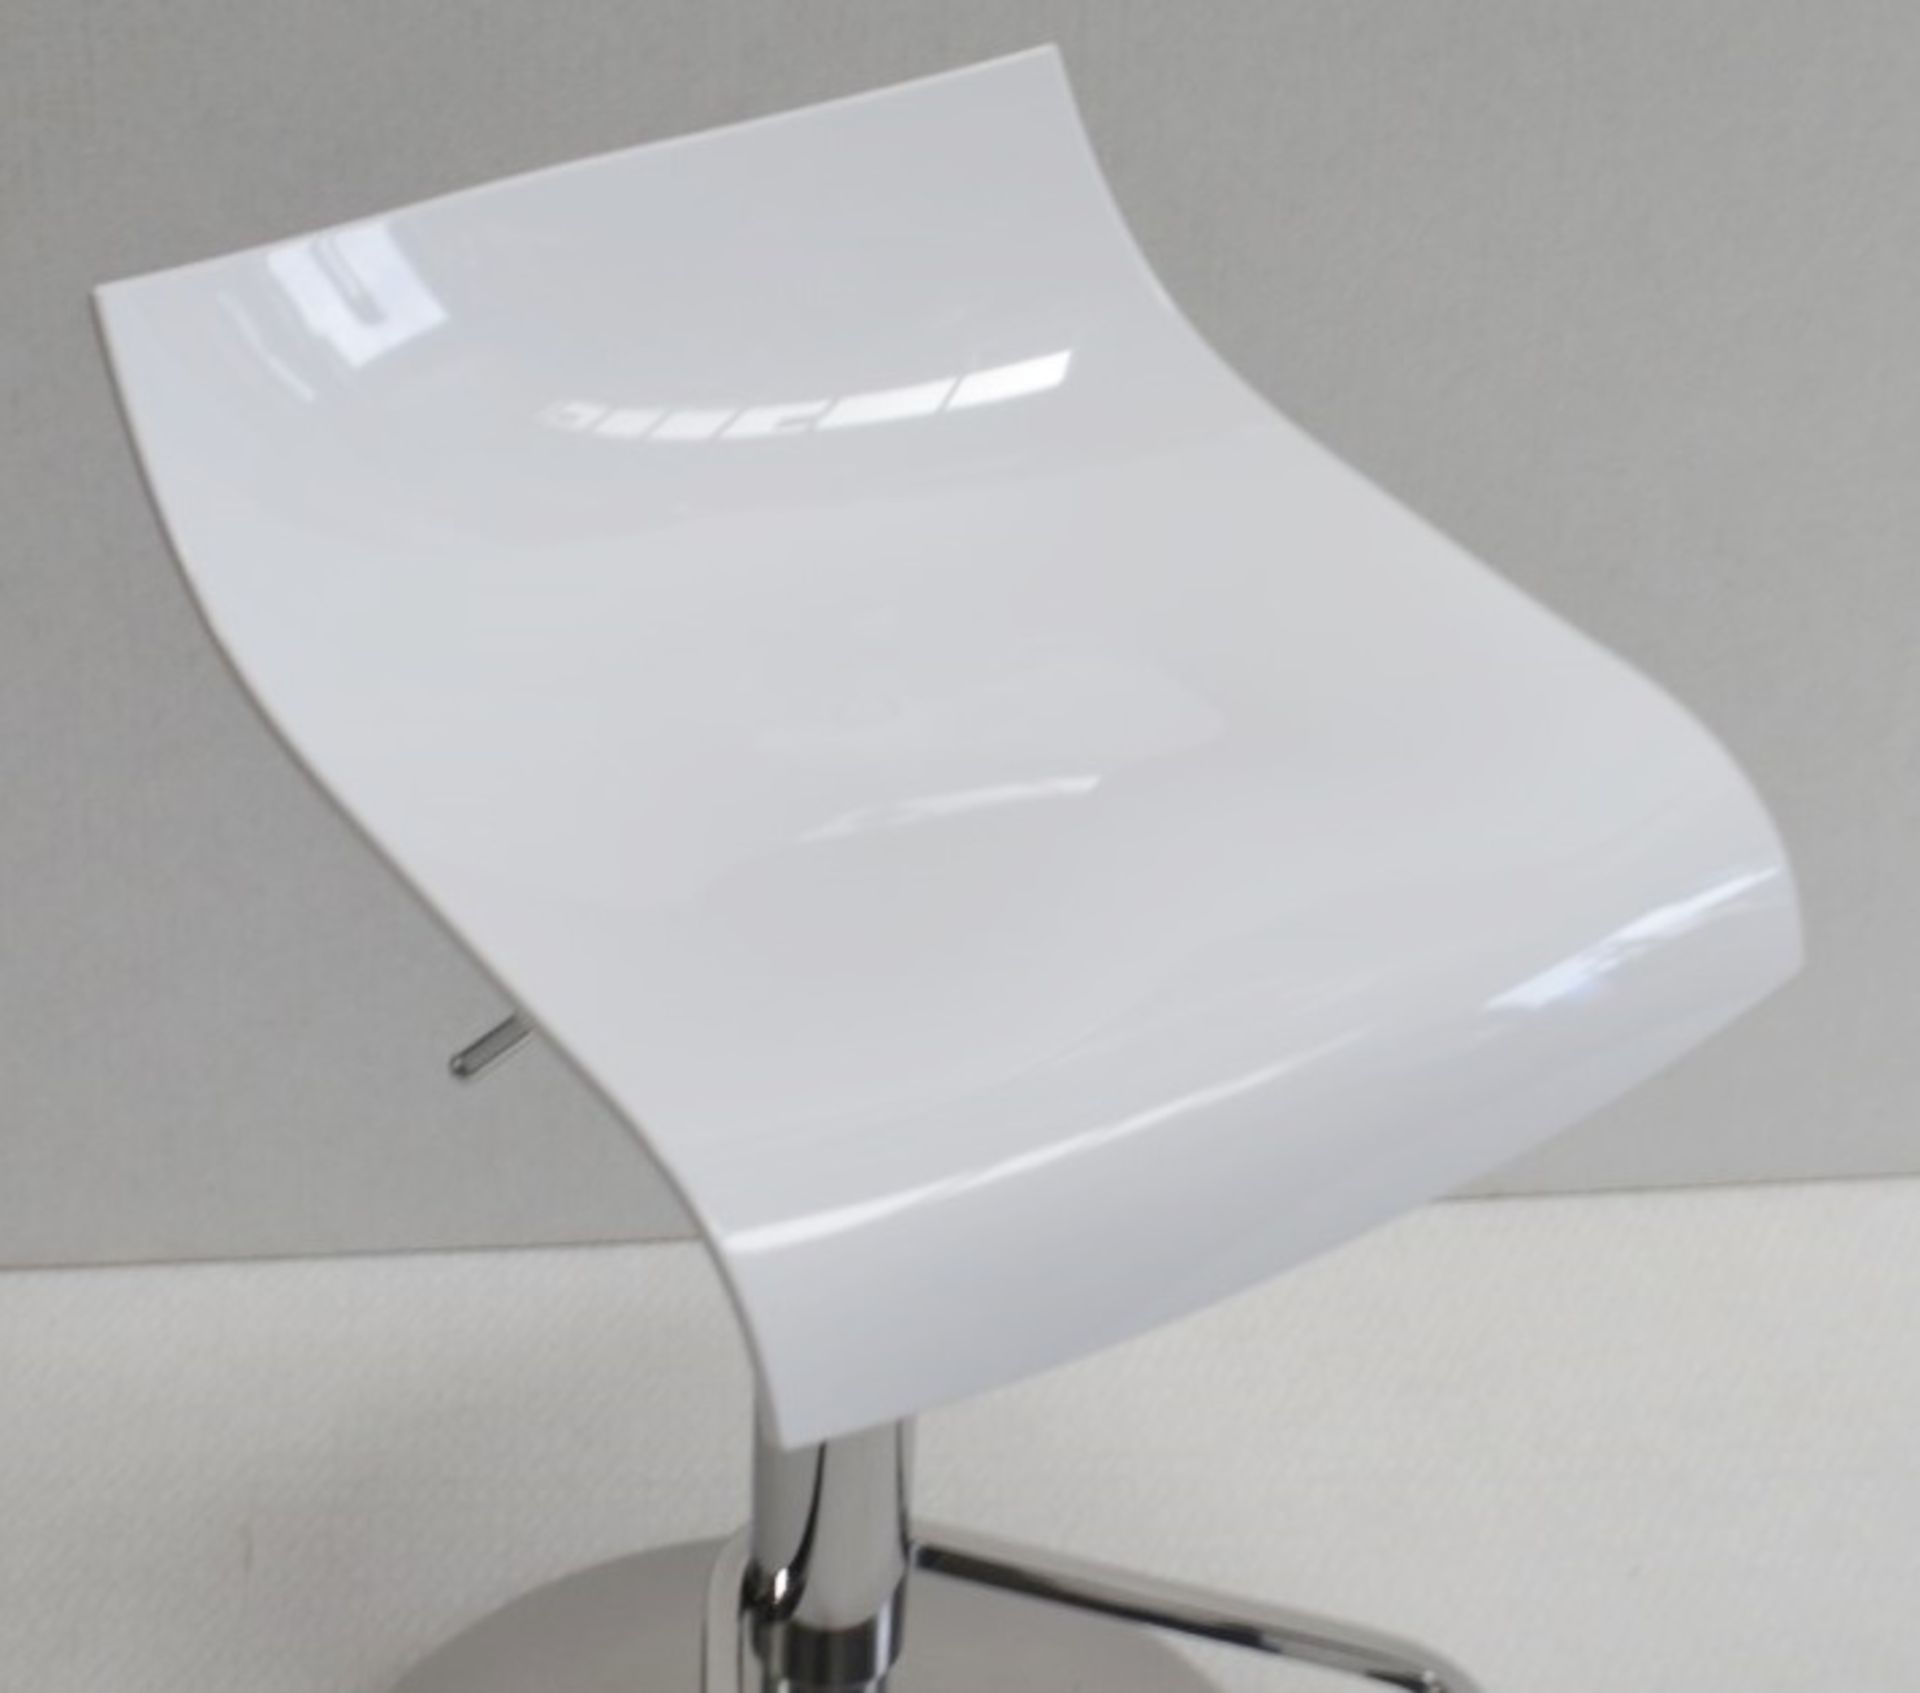 1 x LIGNE ROSET PAM Designer Bar Stool In White 'Synderme' Leather With a Chromed Metal Base - Image 4 of 7